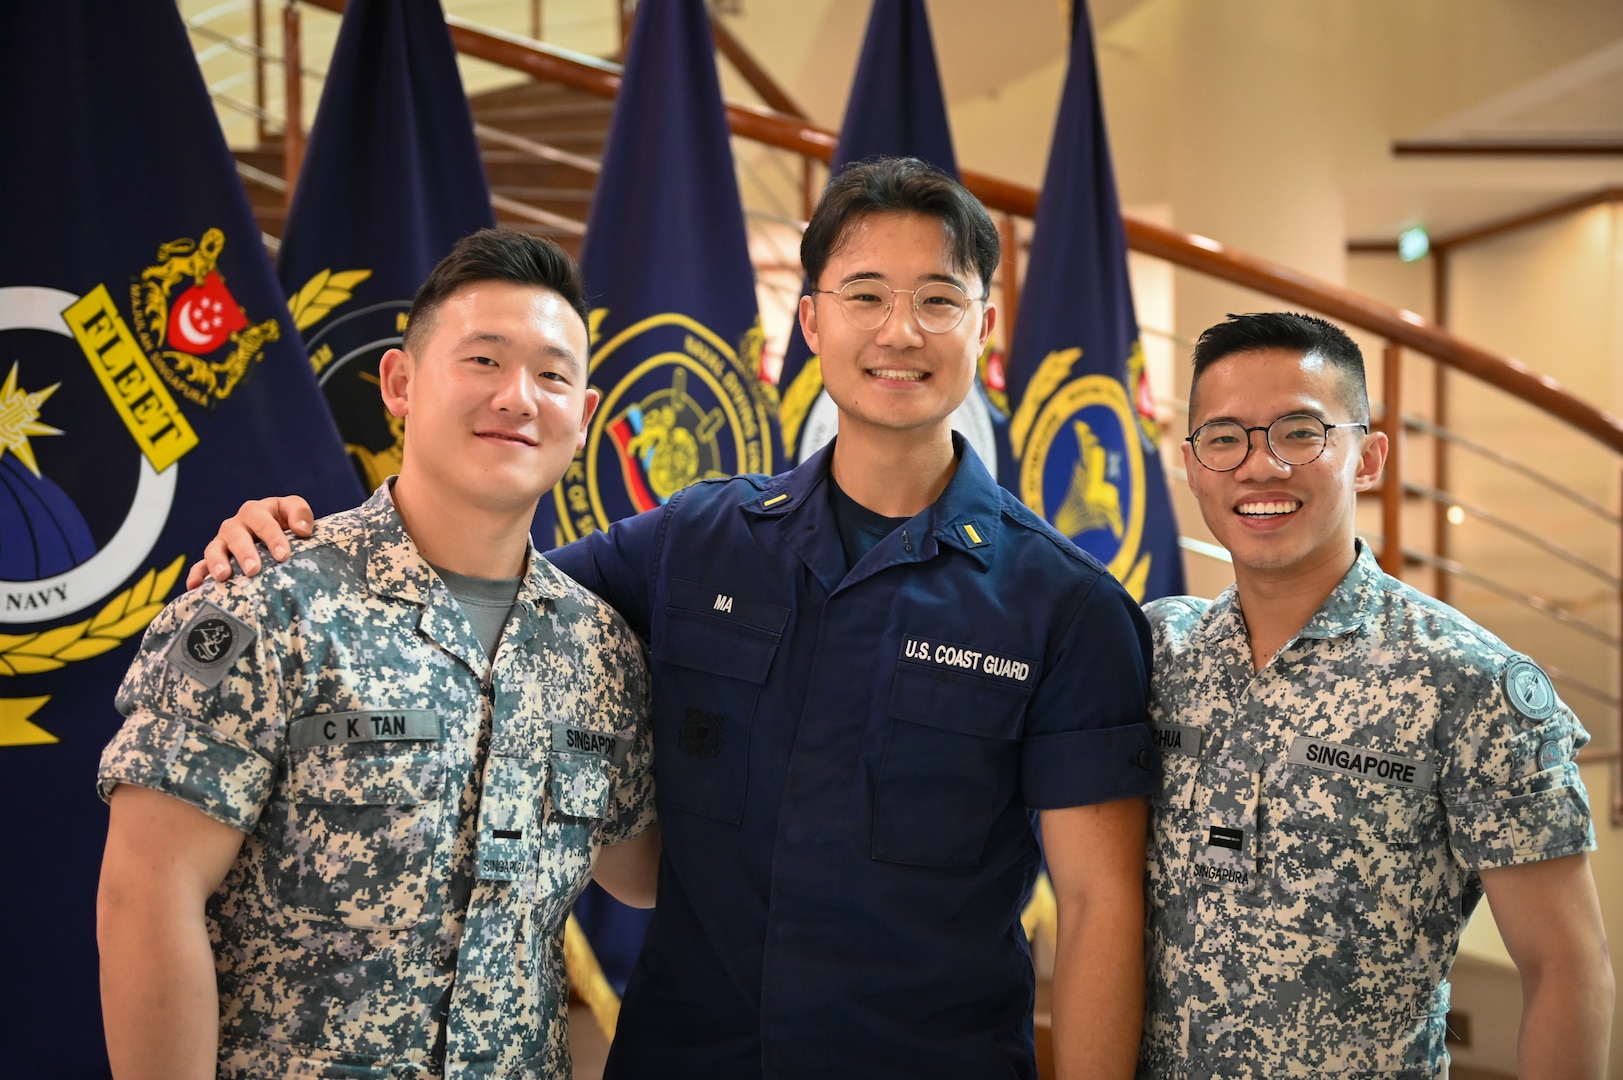 Ens. Tyler Ma, a crewmember from U.S. Coast Guard Cutter Bertholf (WMSL 750), stands with two members of the Republic of Singapore Navy following a ceremony at the Changi Navy Base in Singapore on Feb. 26, 2024. Following the ceremony, crews from both the Bertholf and the Republic of Singapore Navy socialized about their experiences in their respective sea-going services. (U.S. Coast Guard photo by Petty Officer Steve Strohmaier)